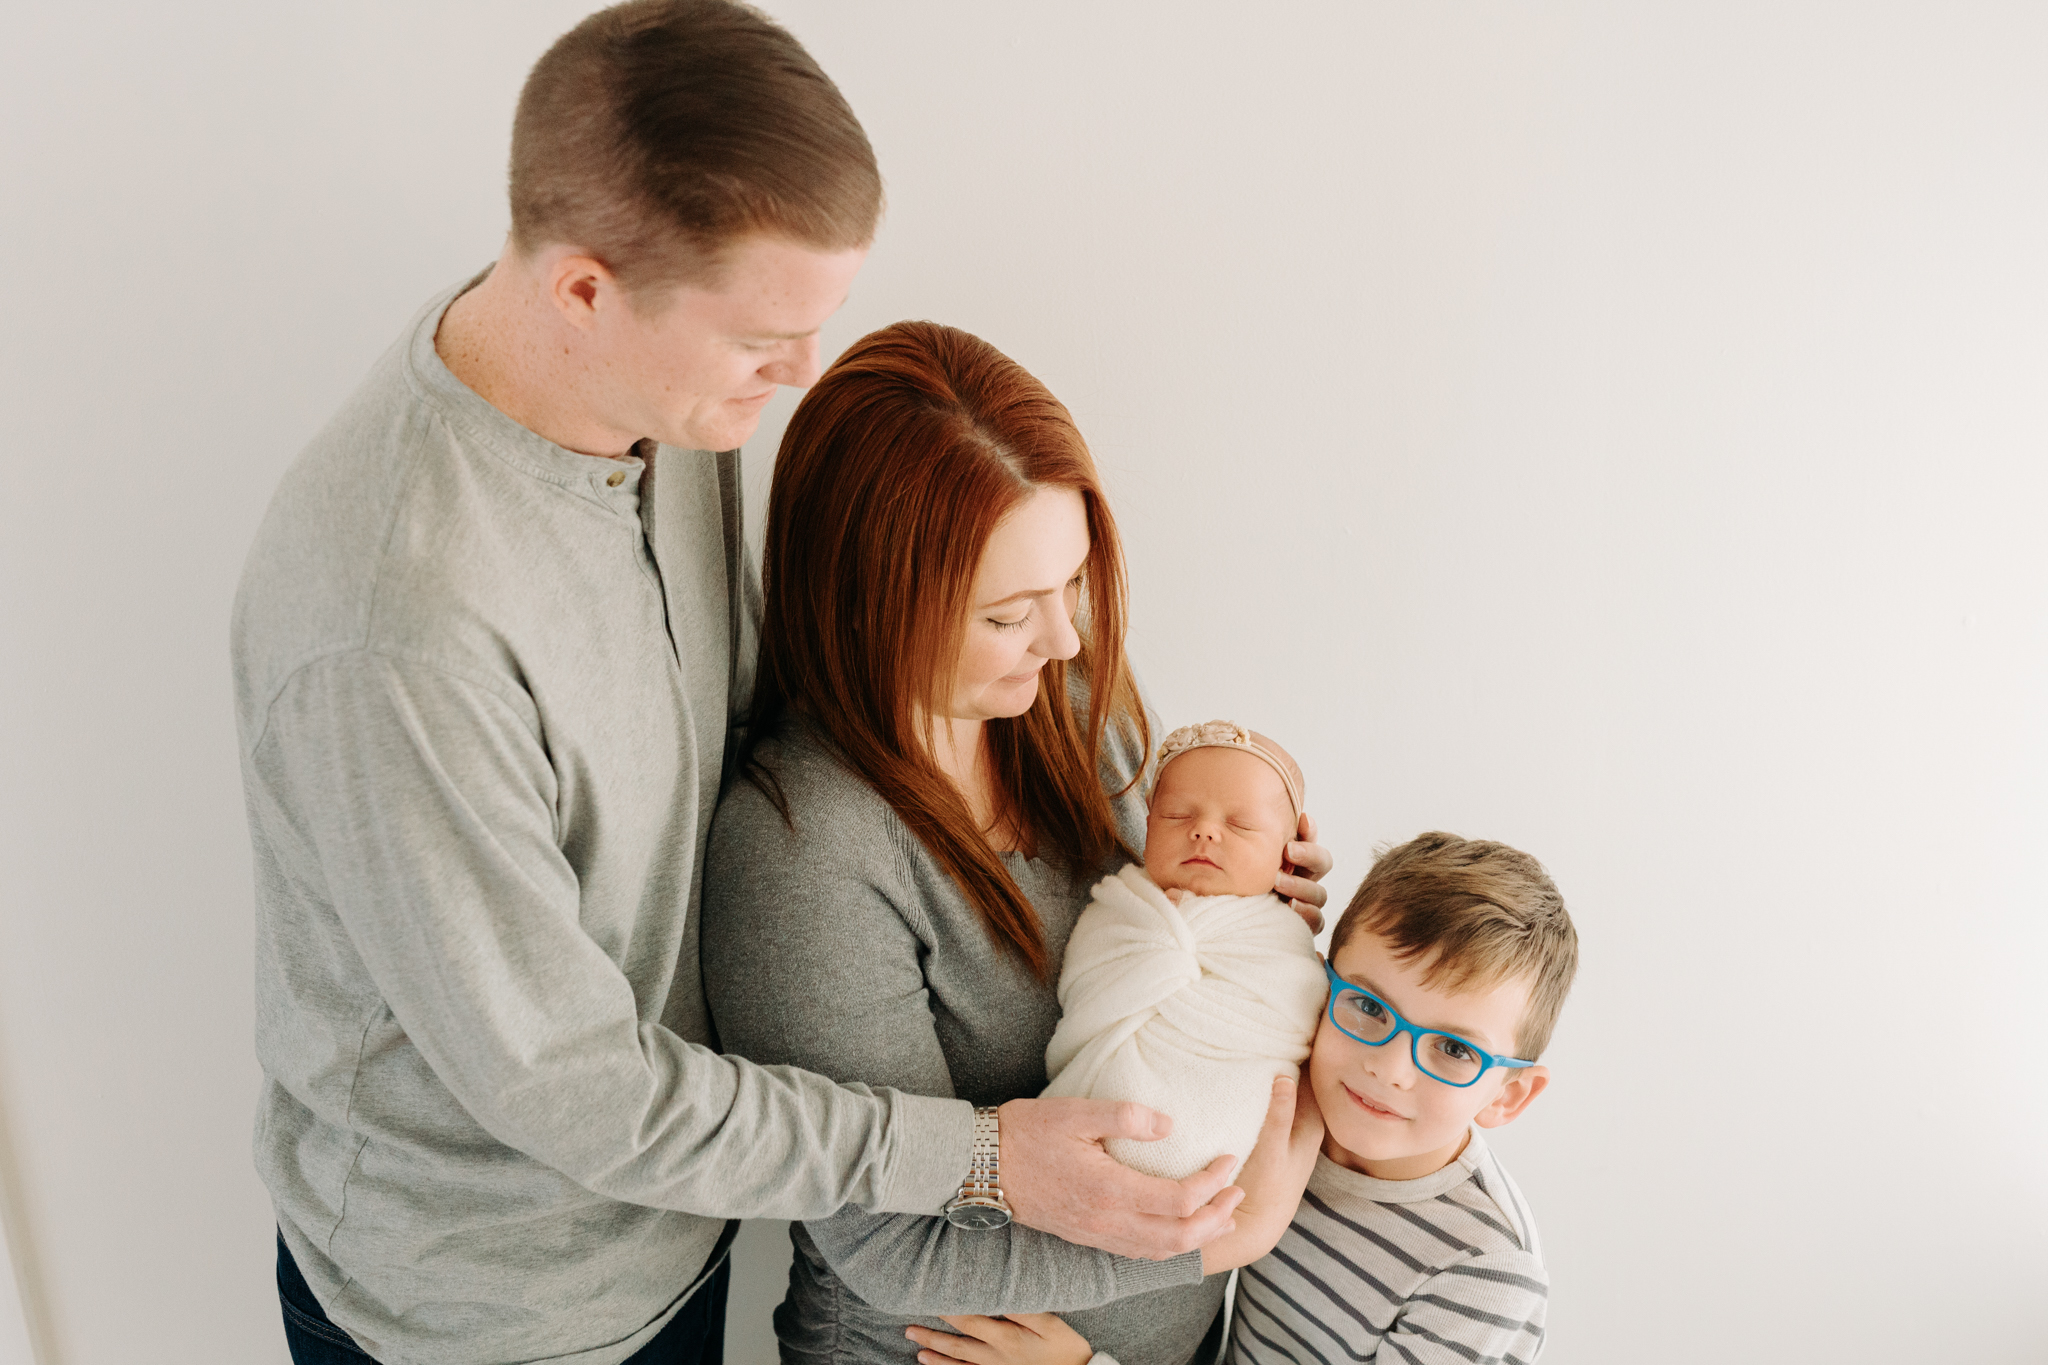 newborn and family photo session | Kelly Adrienne Photography